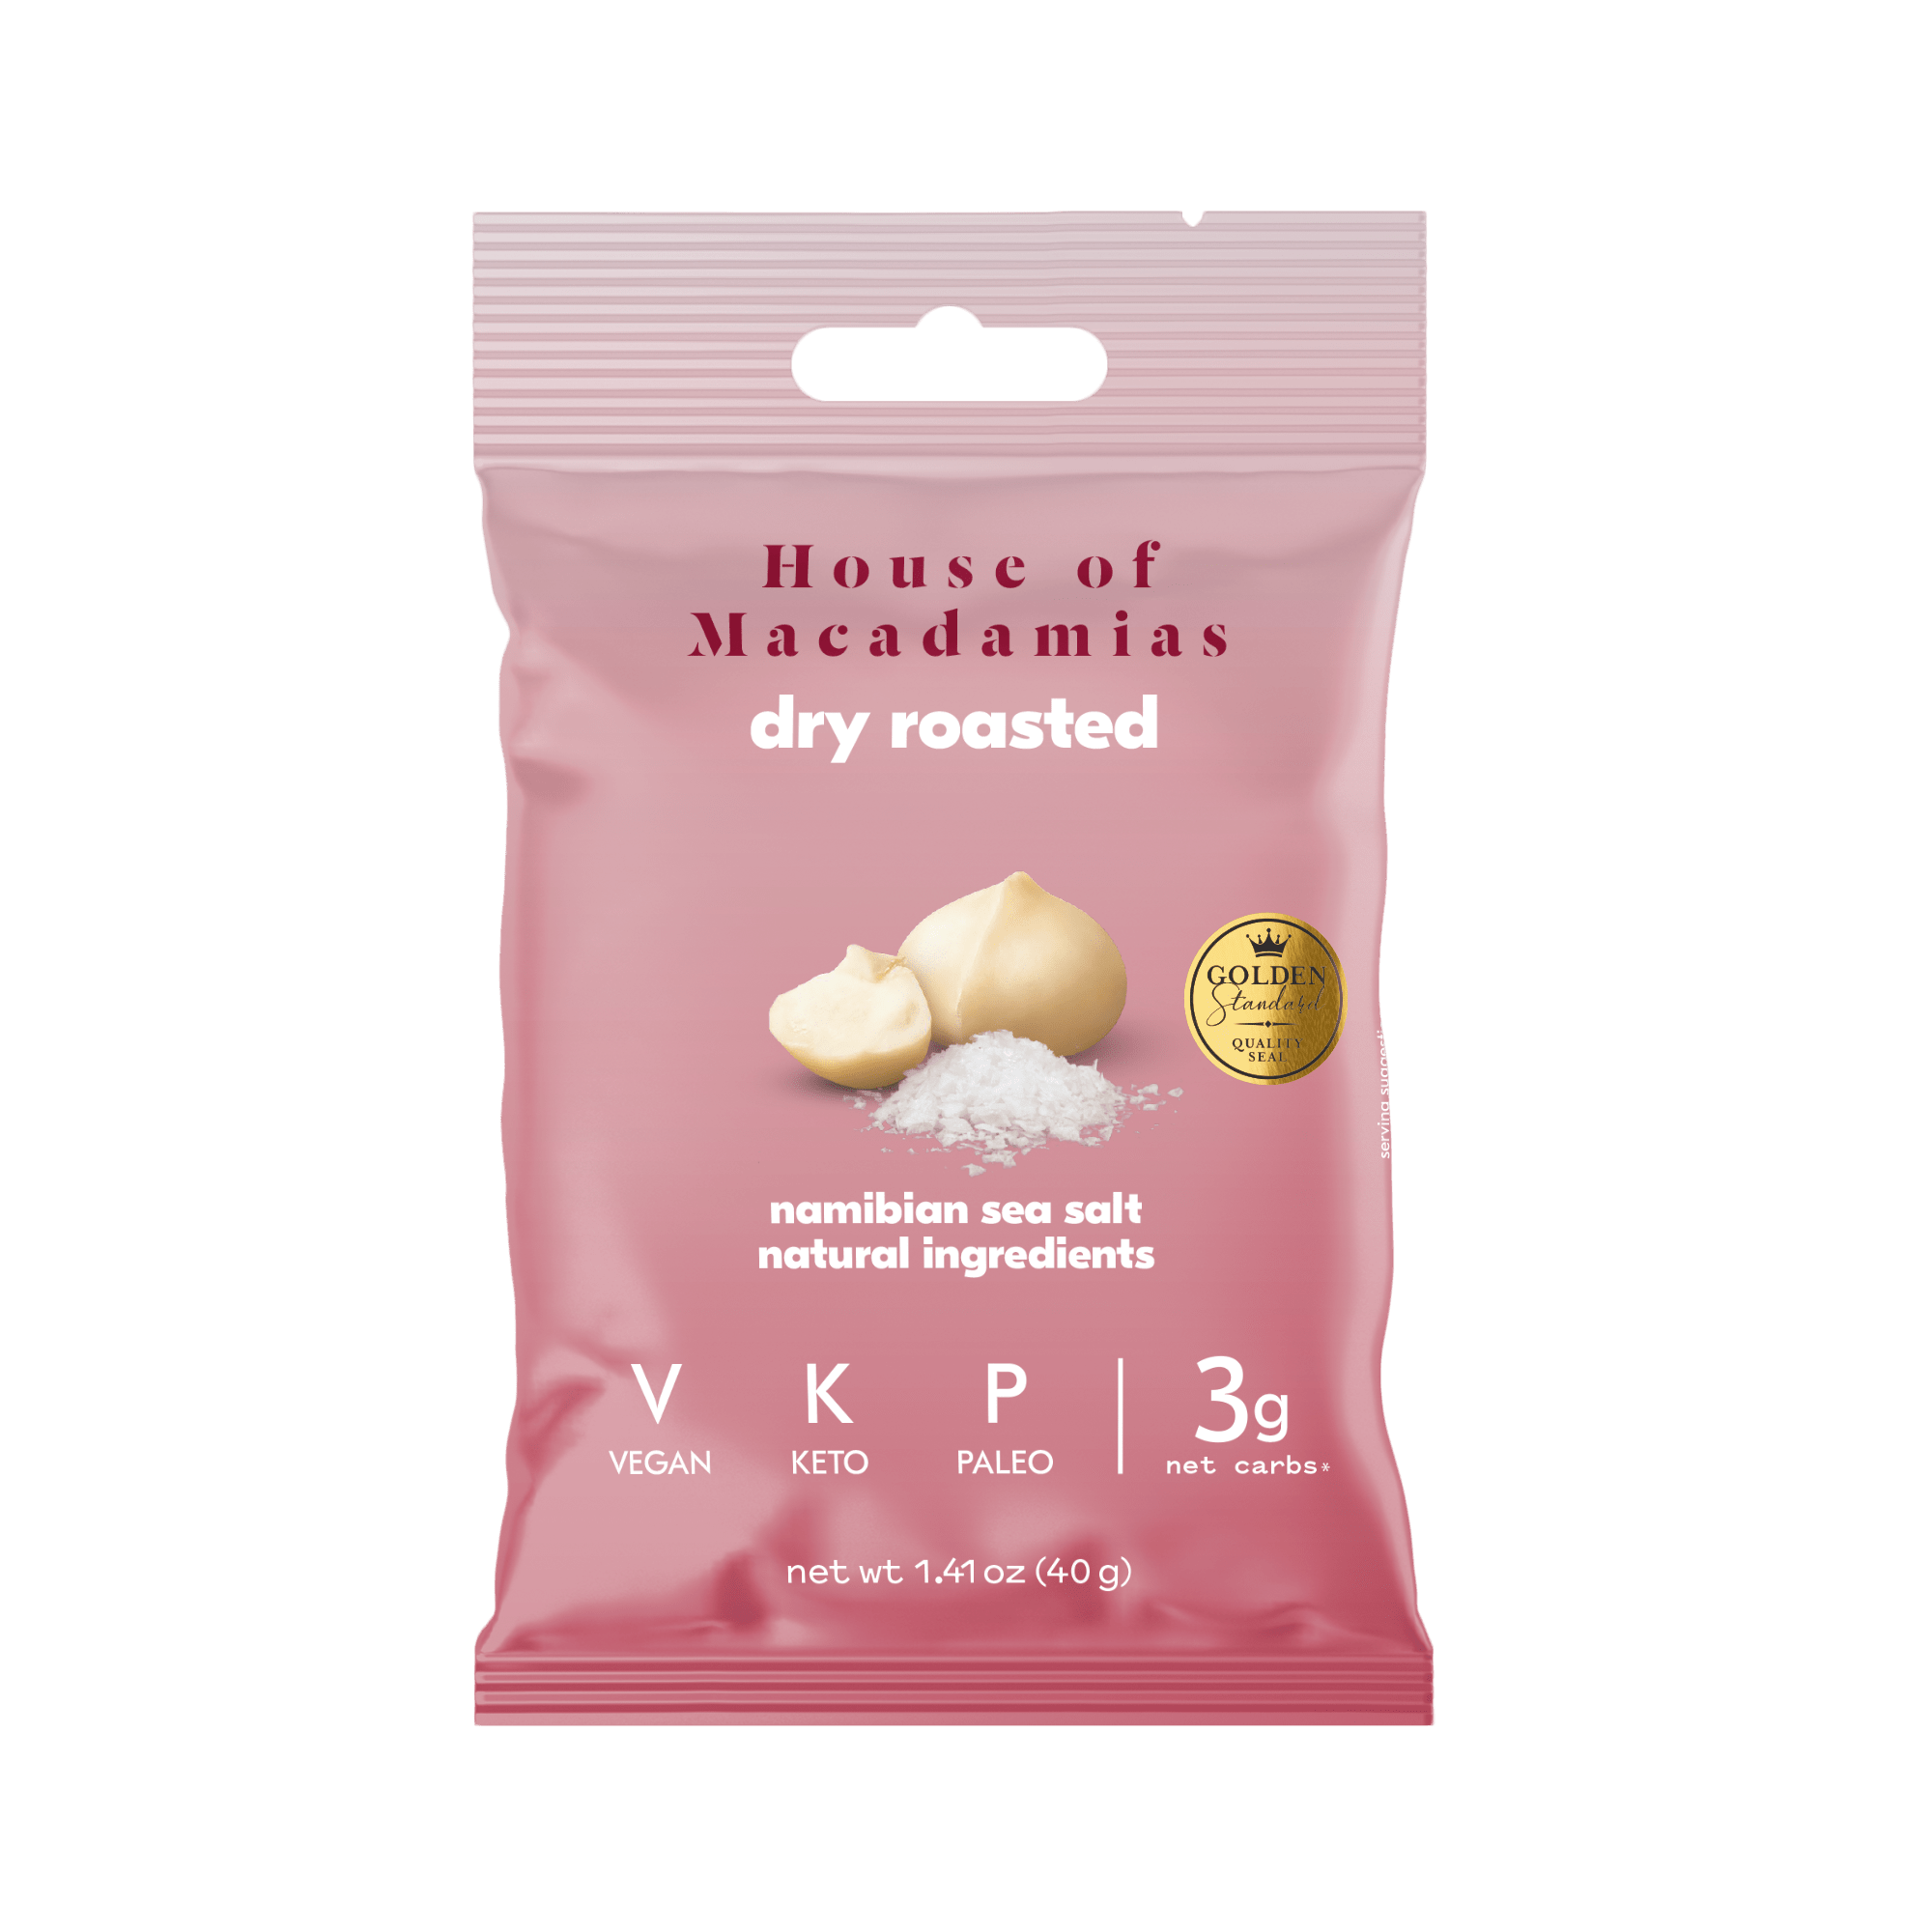 Macadamia Dry Roasted Nuts Variety Pack (3 Flavors, 12 Bags) - House of Macadamias - macadamia benefits